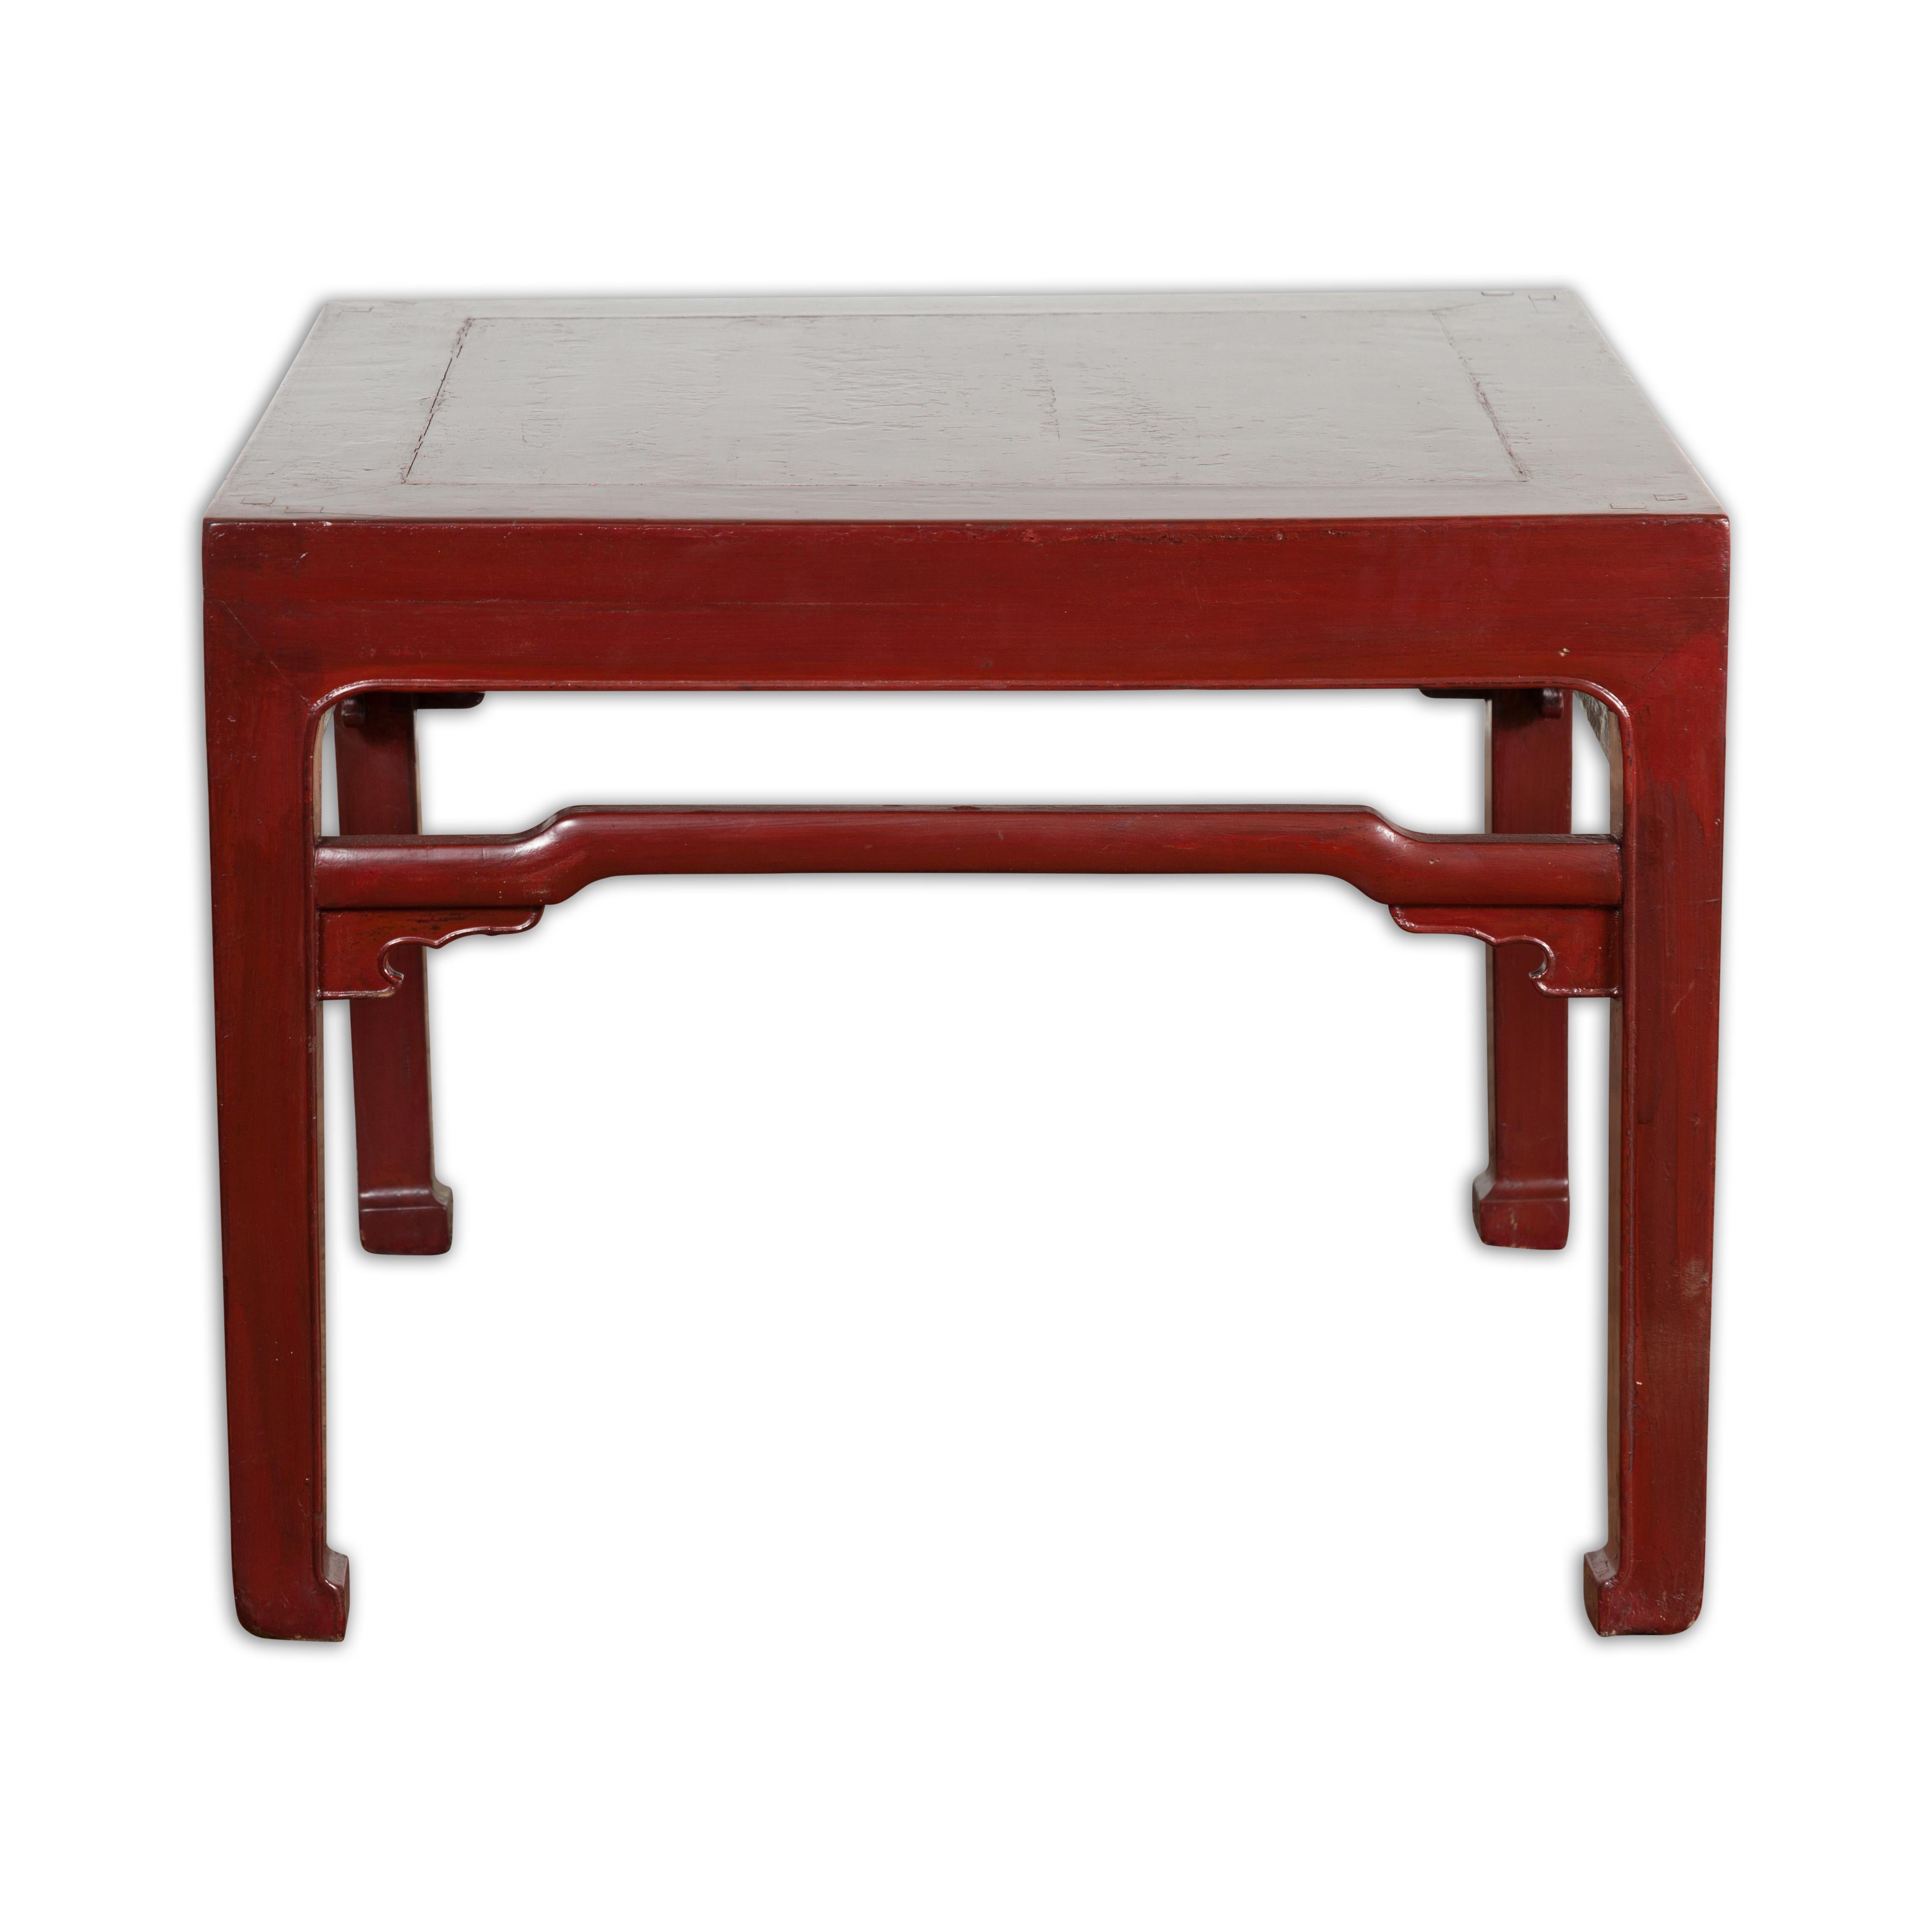 Chinese Late Qing Dynasty Period Red Lacquered Low Table with Horsehoof Feet For Sale 8